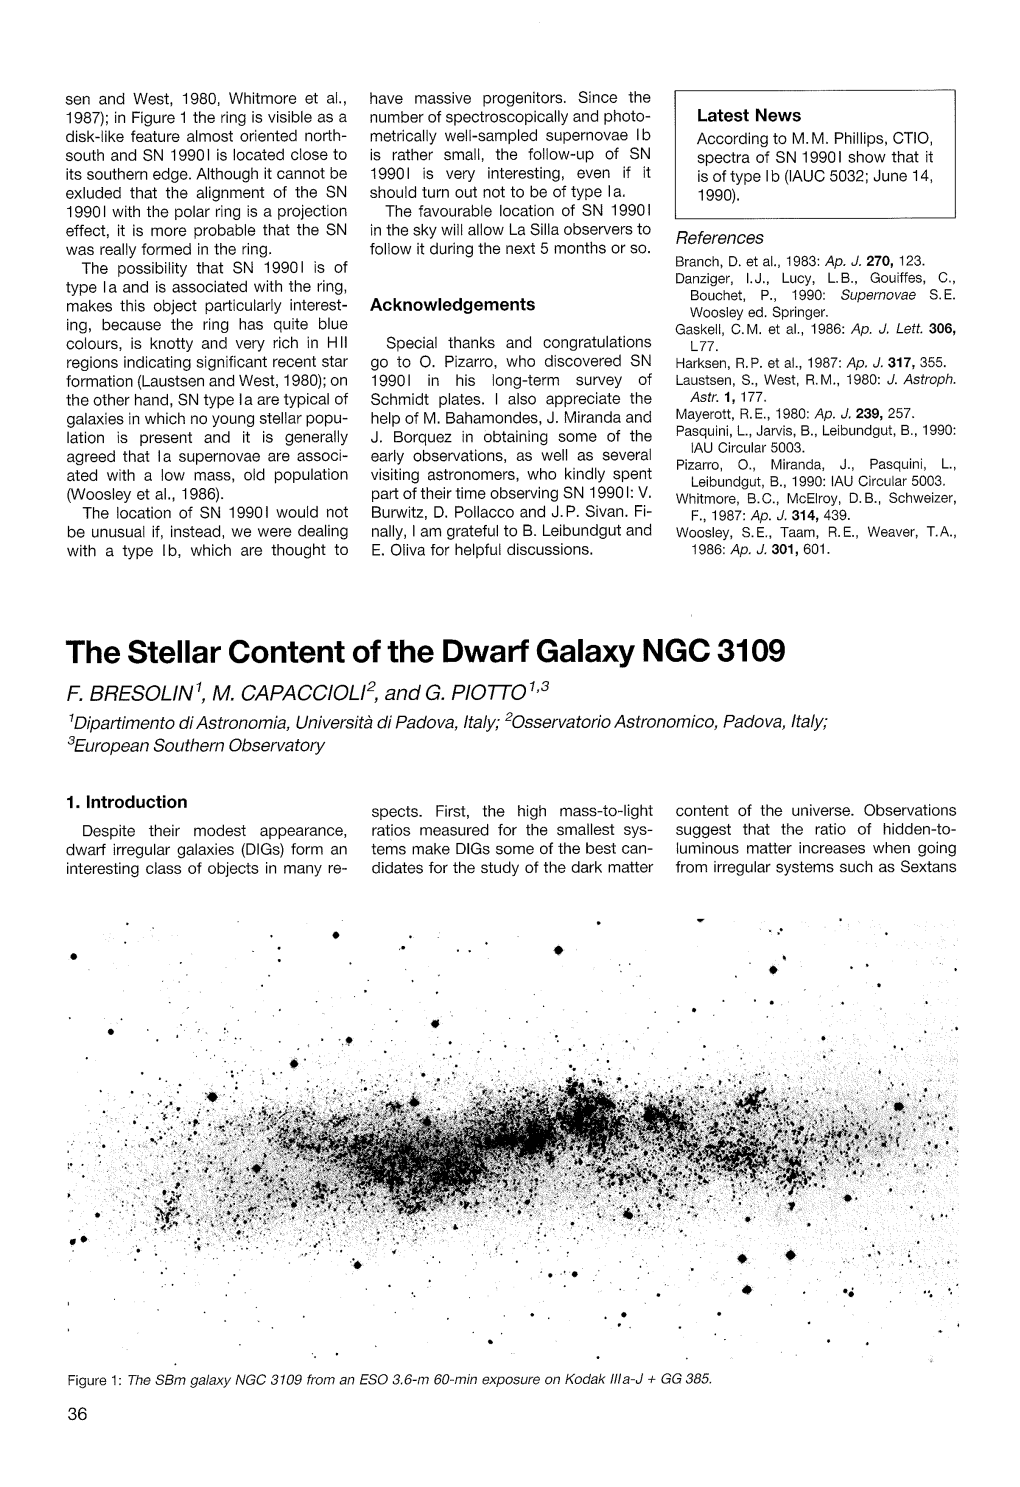 The Stellar Content of the Dwarf Galaxy NGC 3109 1 2 1 F